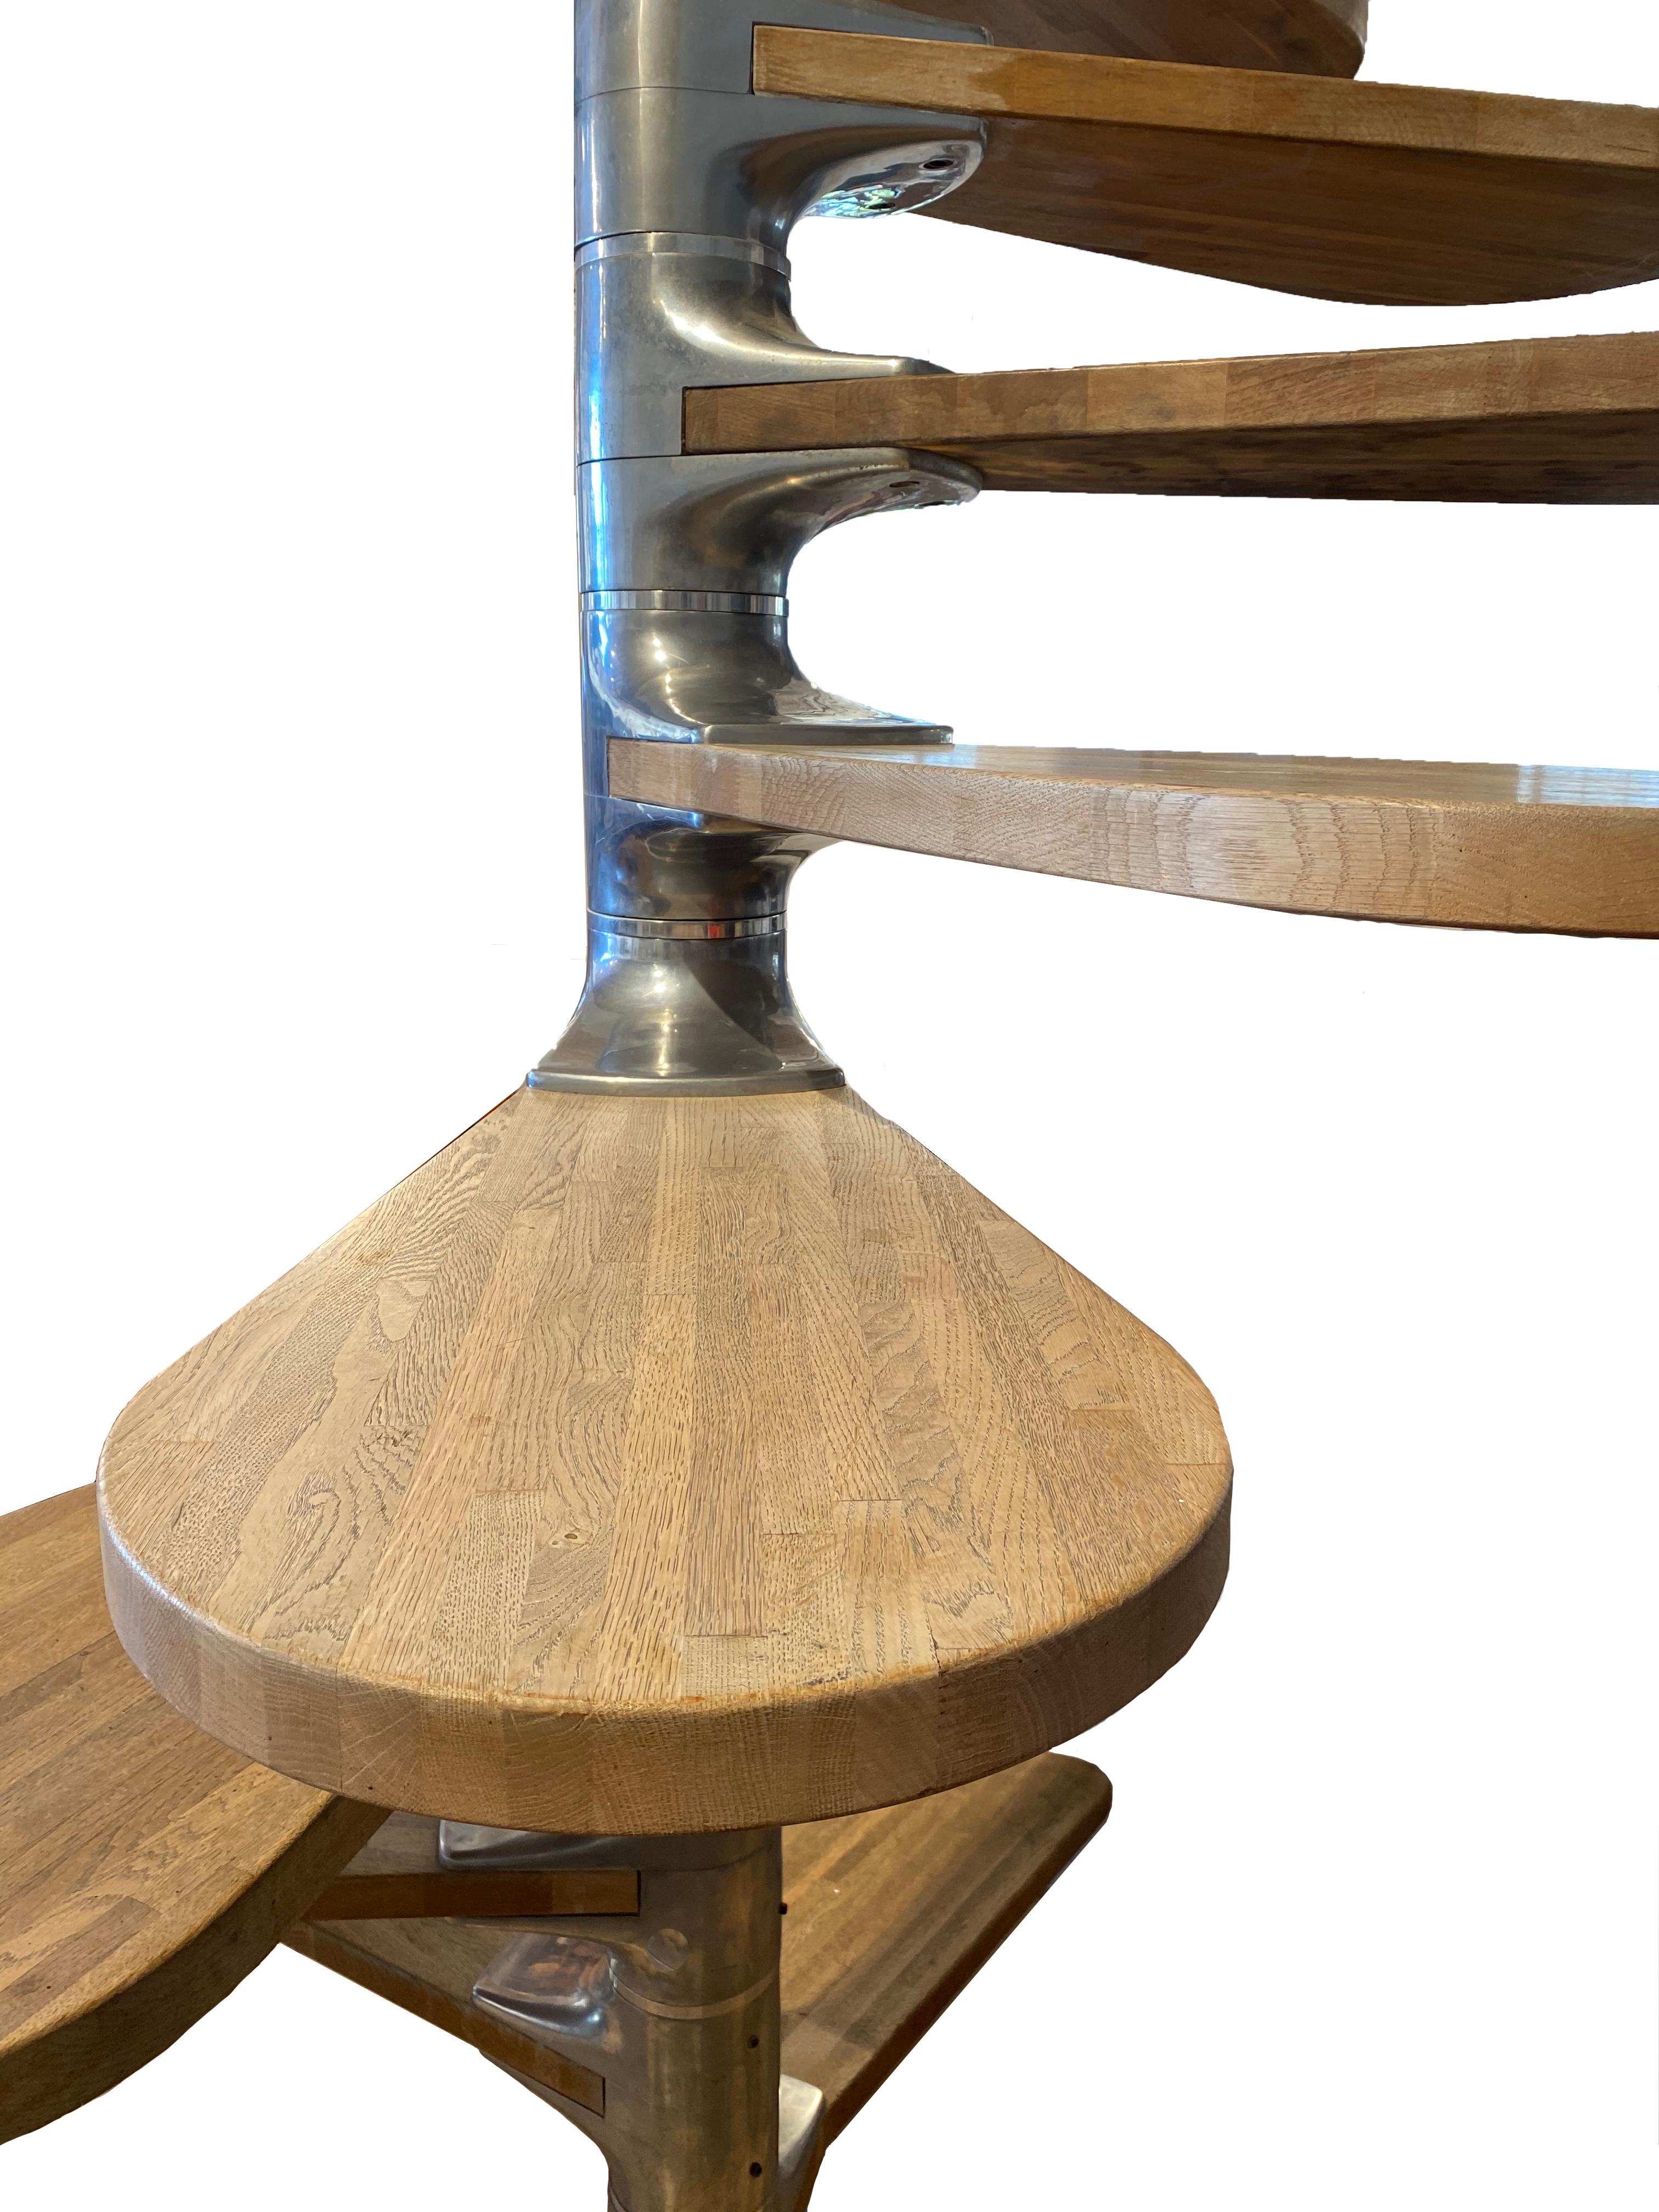 Roger Tallon wooden 'Helicoid' Staircase - M400
TH Design.
Spiral staircase by Roger Tallon.
Made of 24 wooden steps.
Circa 1964, France.
Very good vintage condition.
Roger Tallon (March 9, 1929 - October 20, 2011) was a French designer, considered